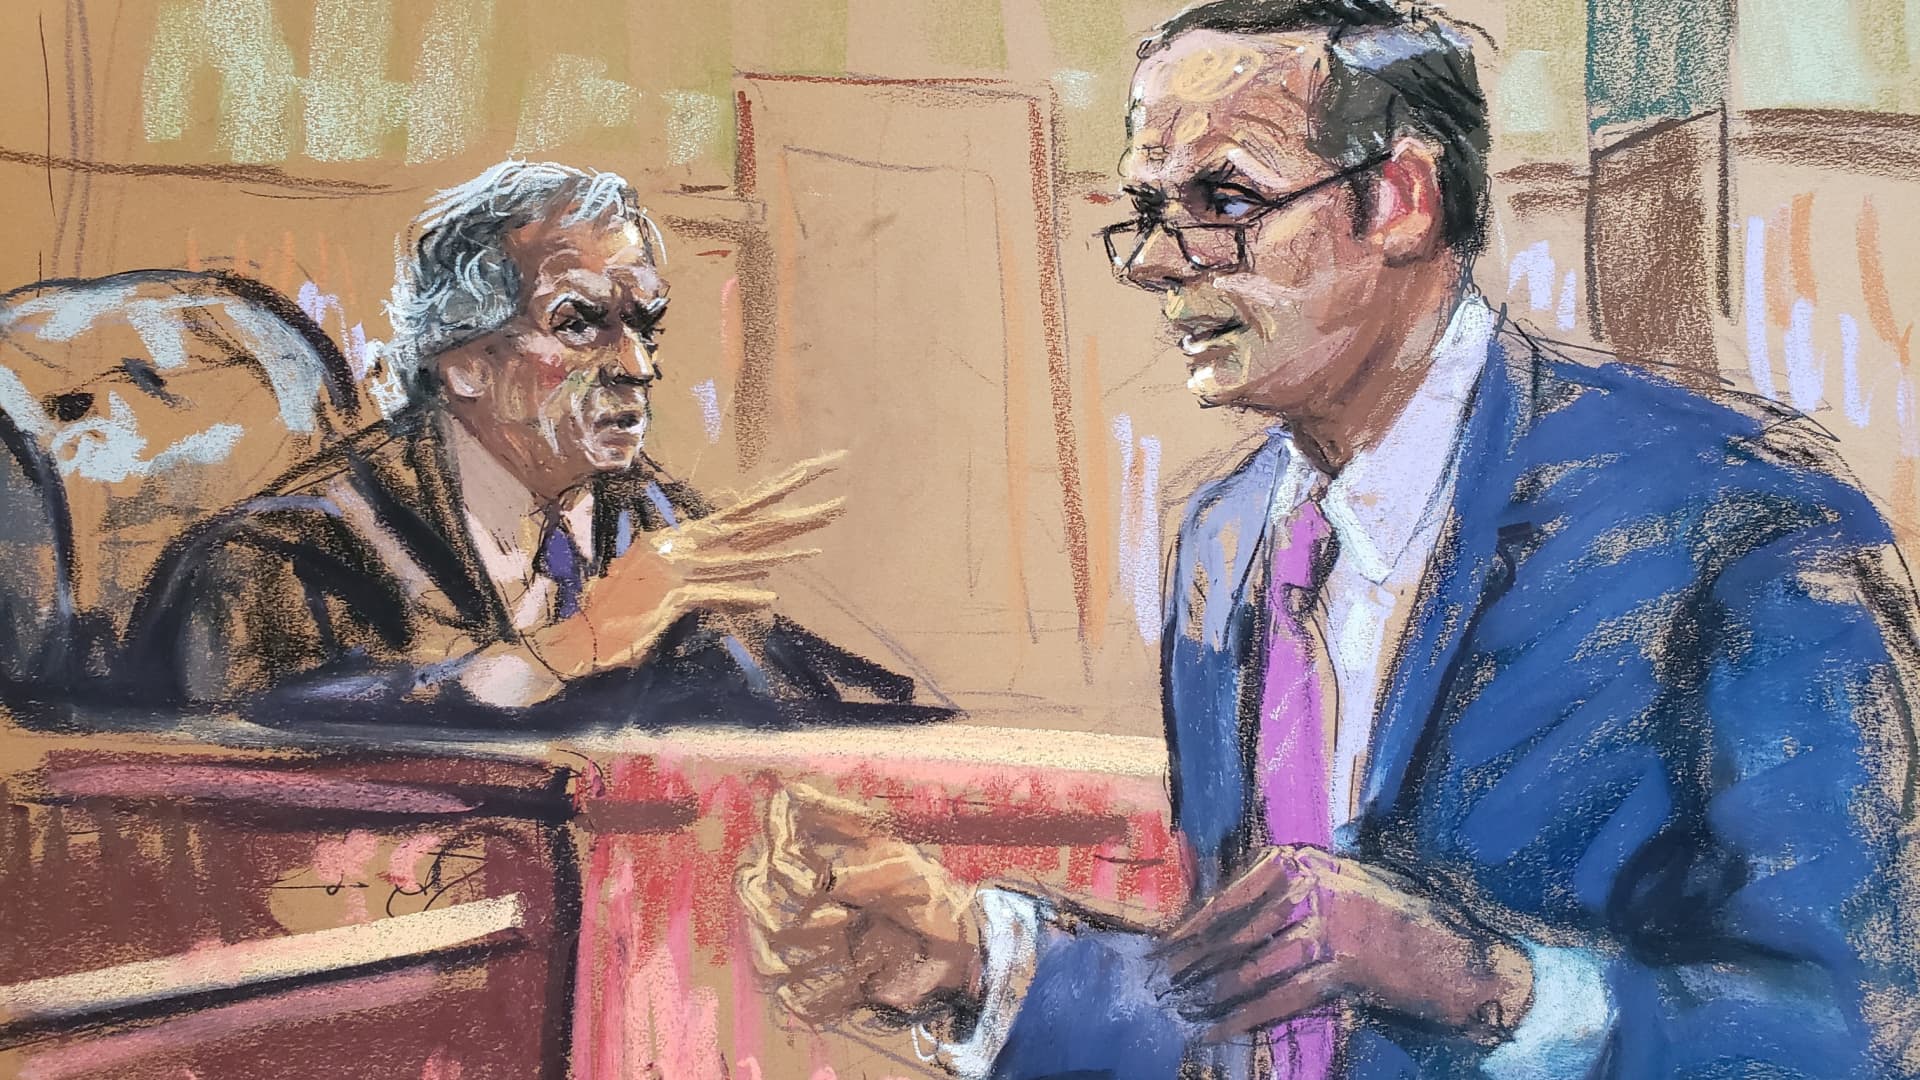 Justice Arthur Engoron listens to Trump's lawyer Christopher Kise during a hearing related to New York Attorney General Letitia James' civil lawsuit alleging that former U.S. President Donald Trump ran a systematic fraud at his family business at a courthouse in New York, September 22, 2023 in this courtroom sketch.